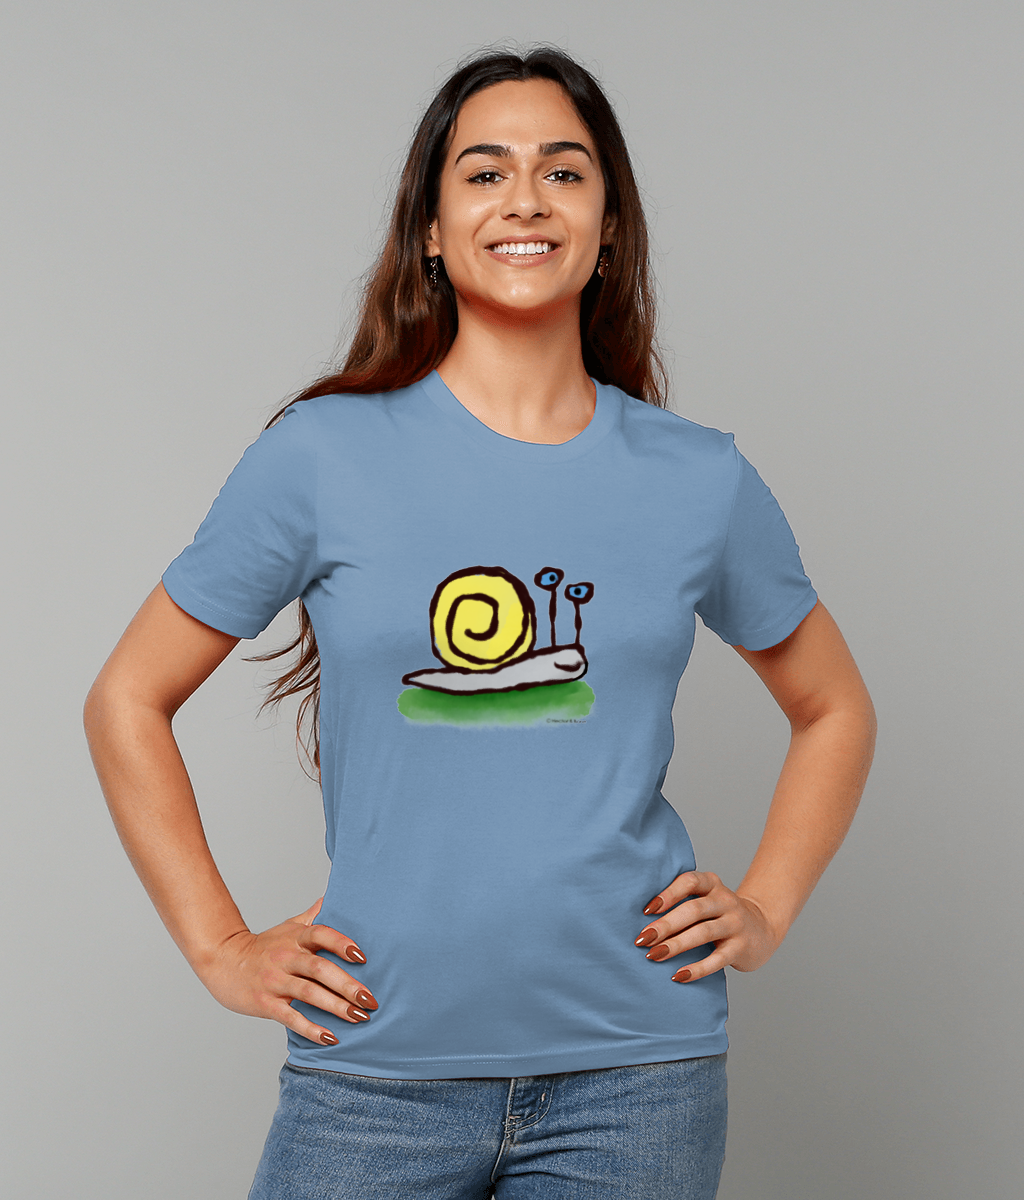 Cute snail T-shirt - A young woman wearing a Mid Heather Blue Unisex Hector and Bone vegan cotton T-shirt with printed cute Snail illustration